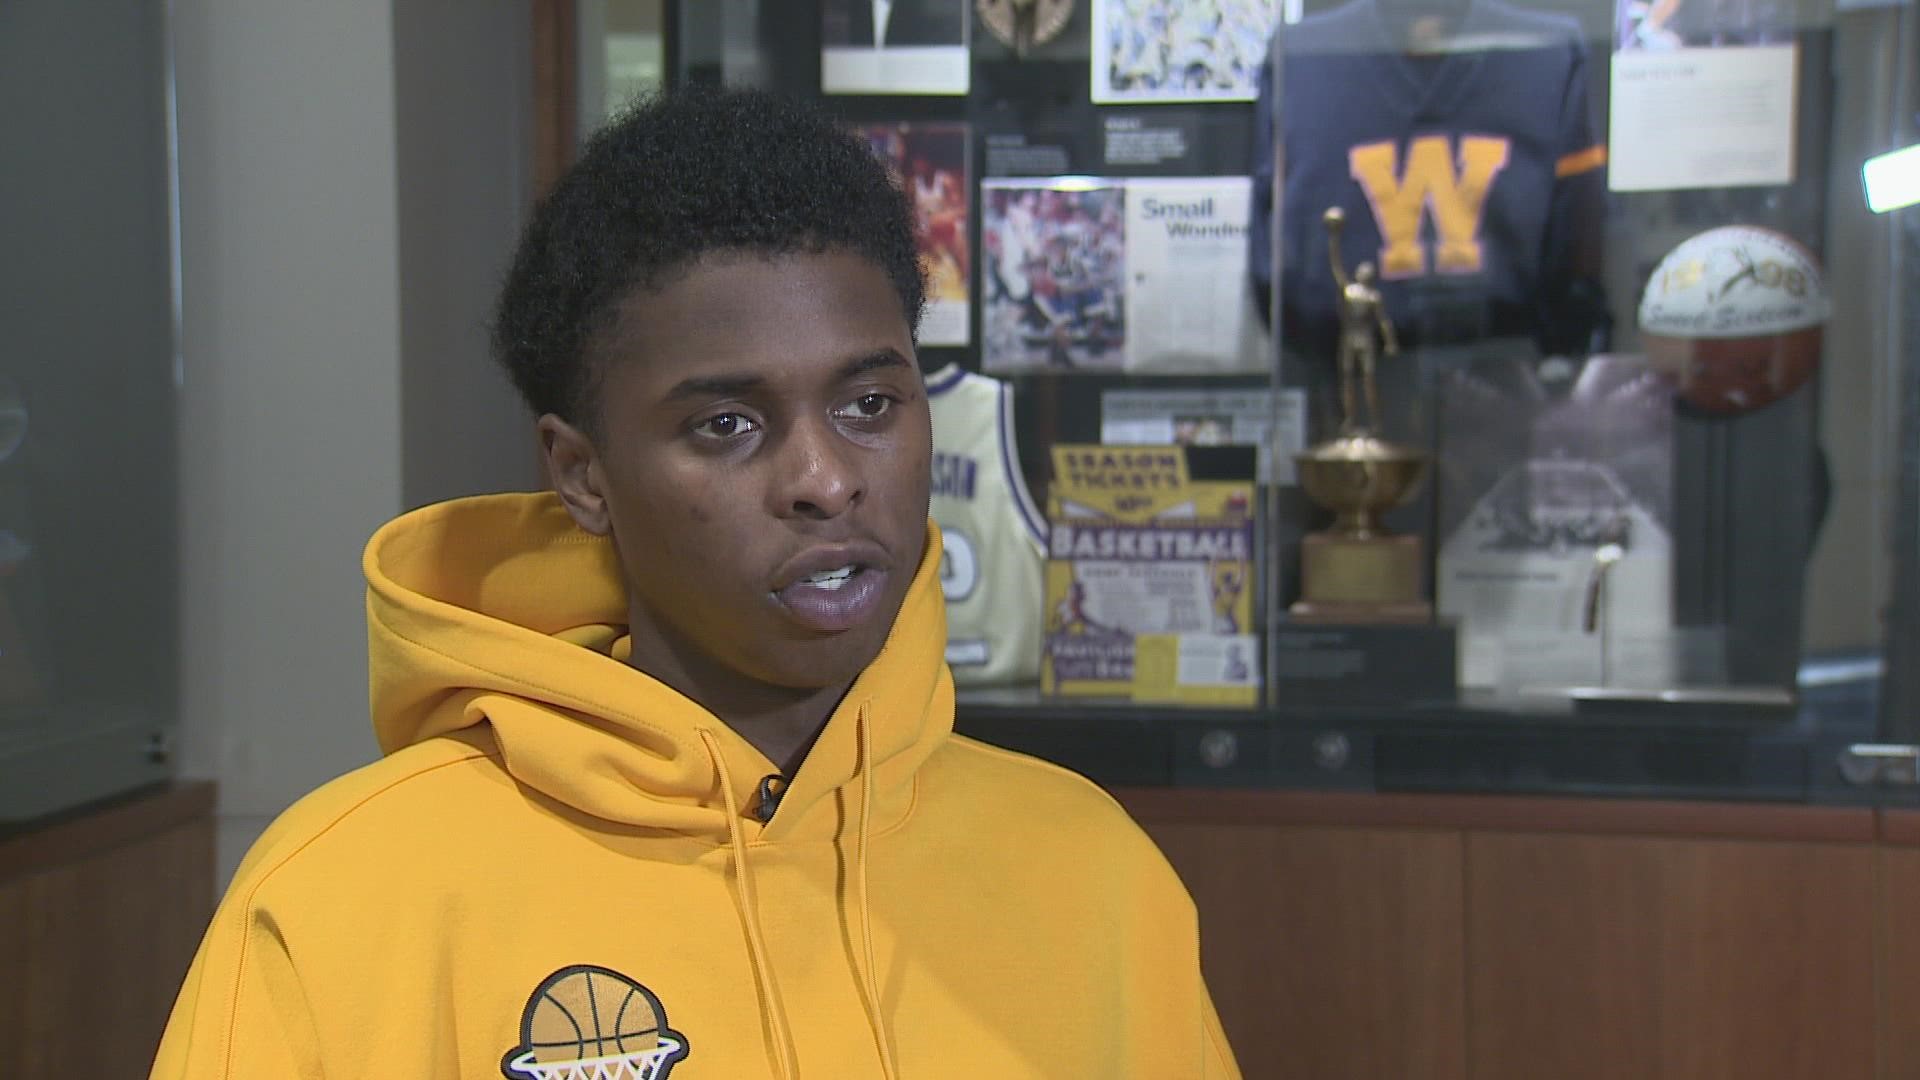 Huskies guard Noah Williams and his UW teammates face Williams' old team Saturday in Pullman. He talks about playing for the Cougars and now playing against them.